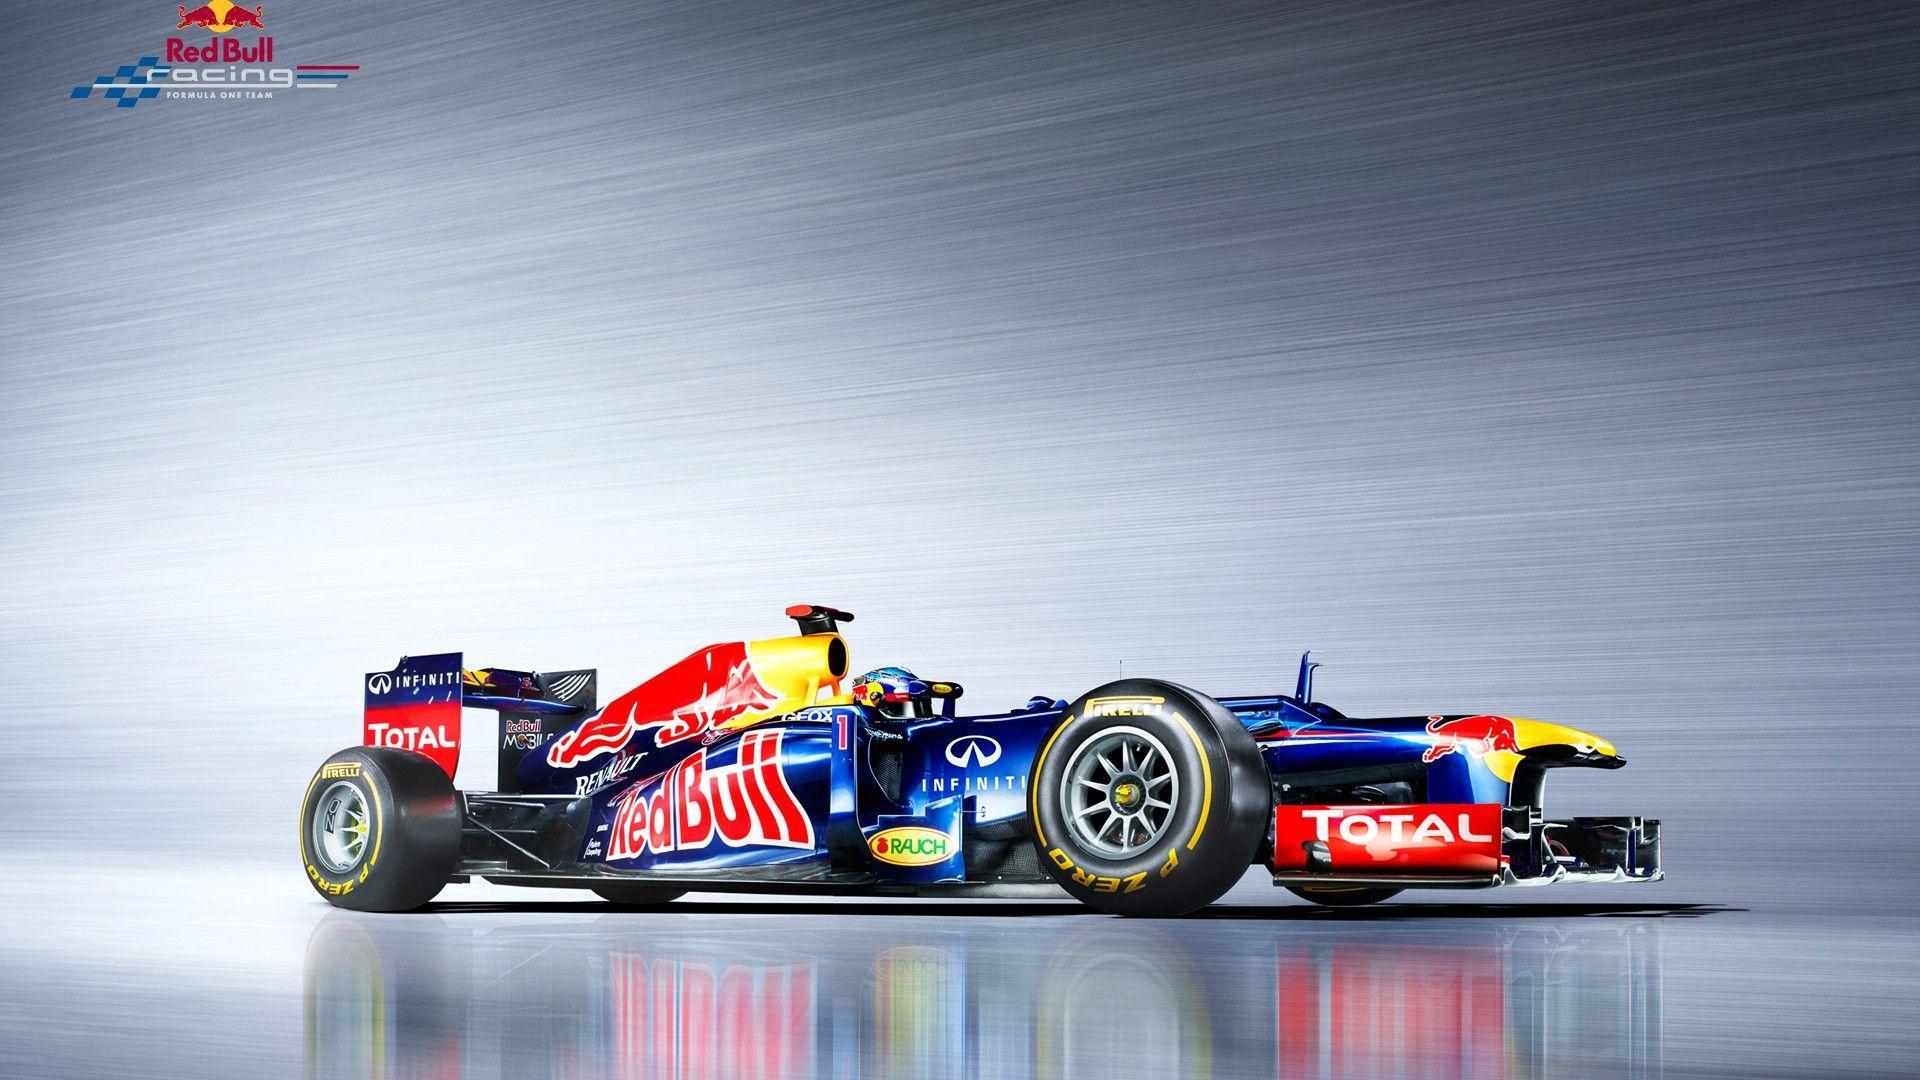 One Cars F1 Wallpaper in HD For Free Download